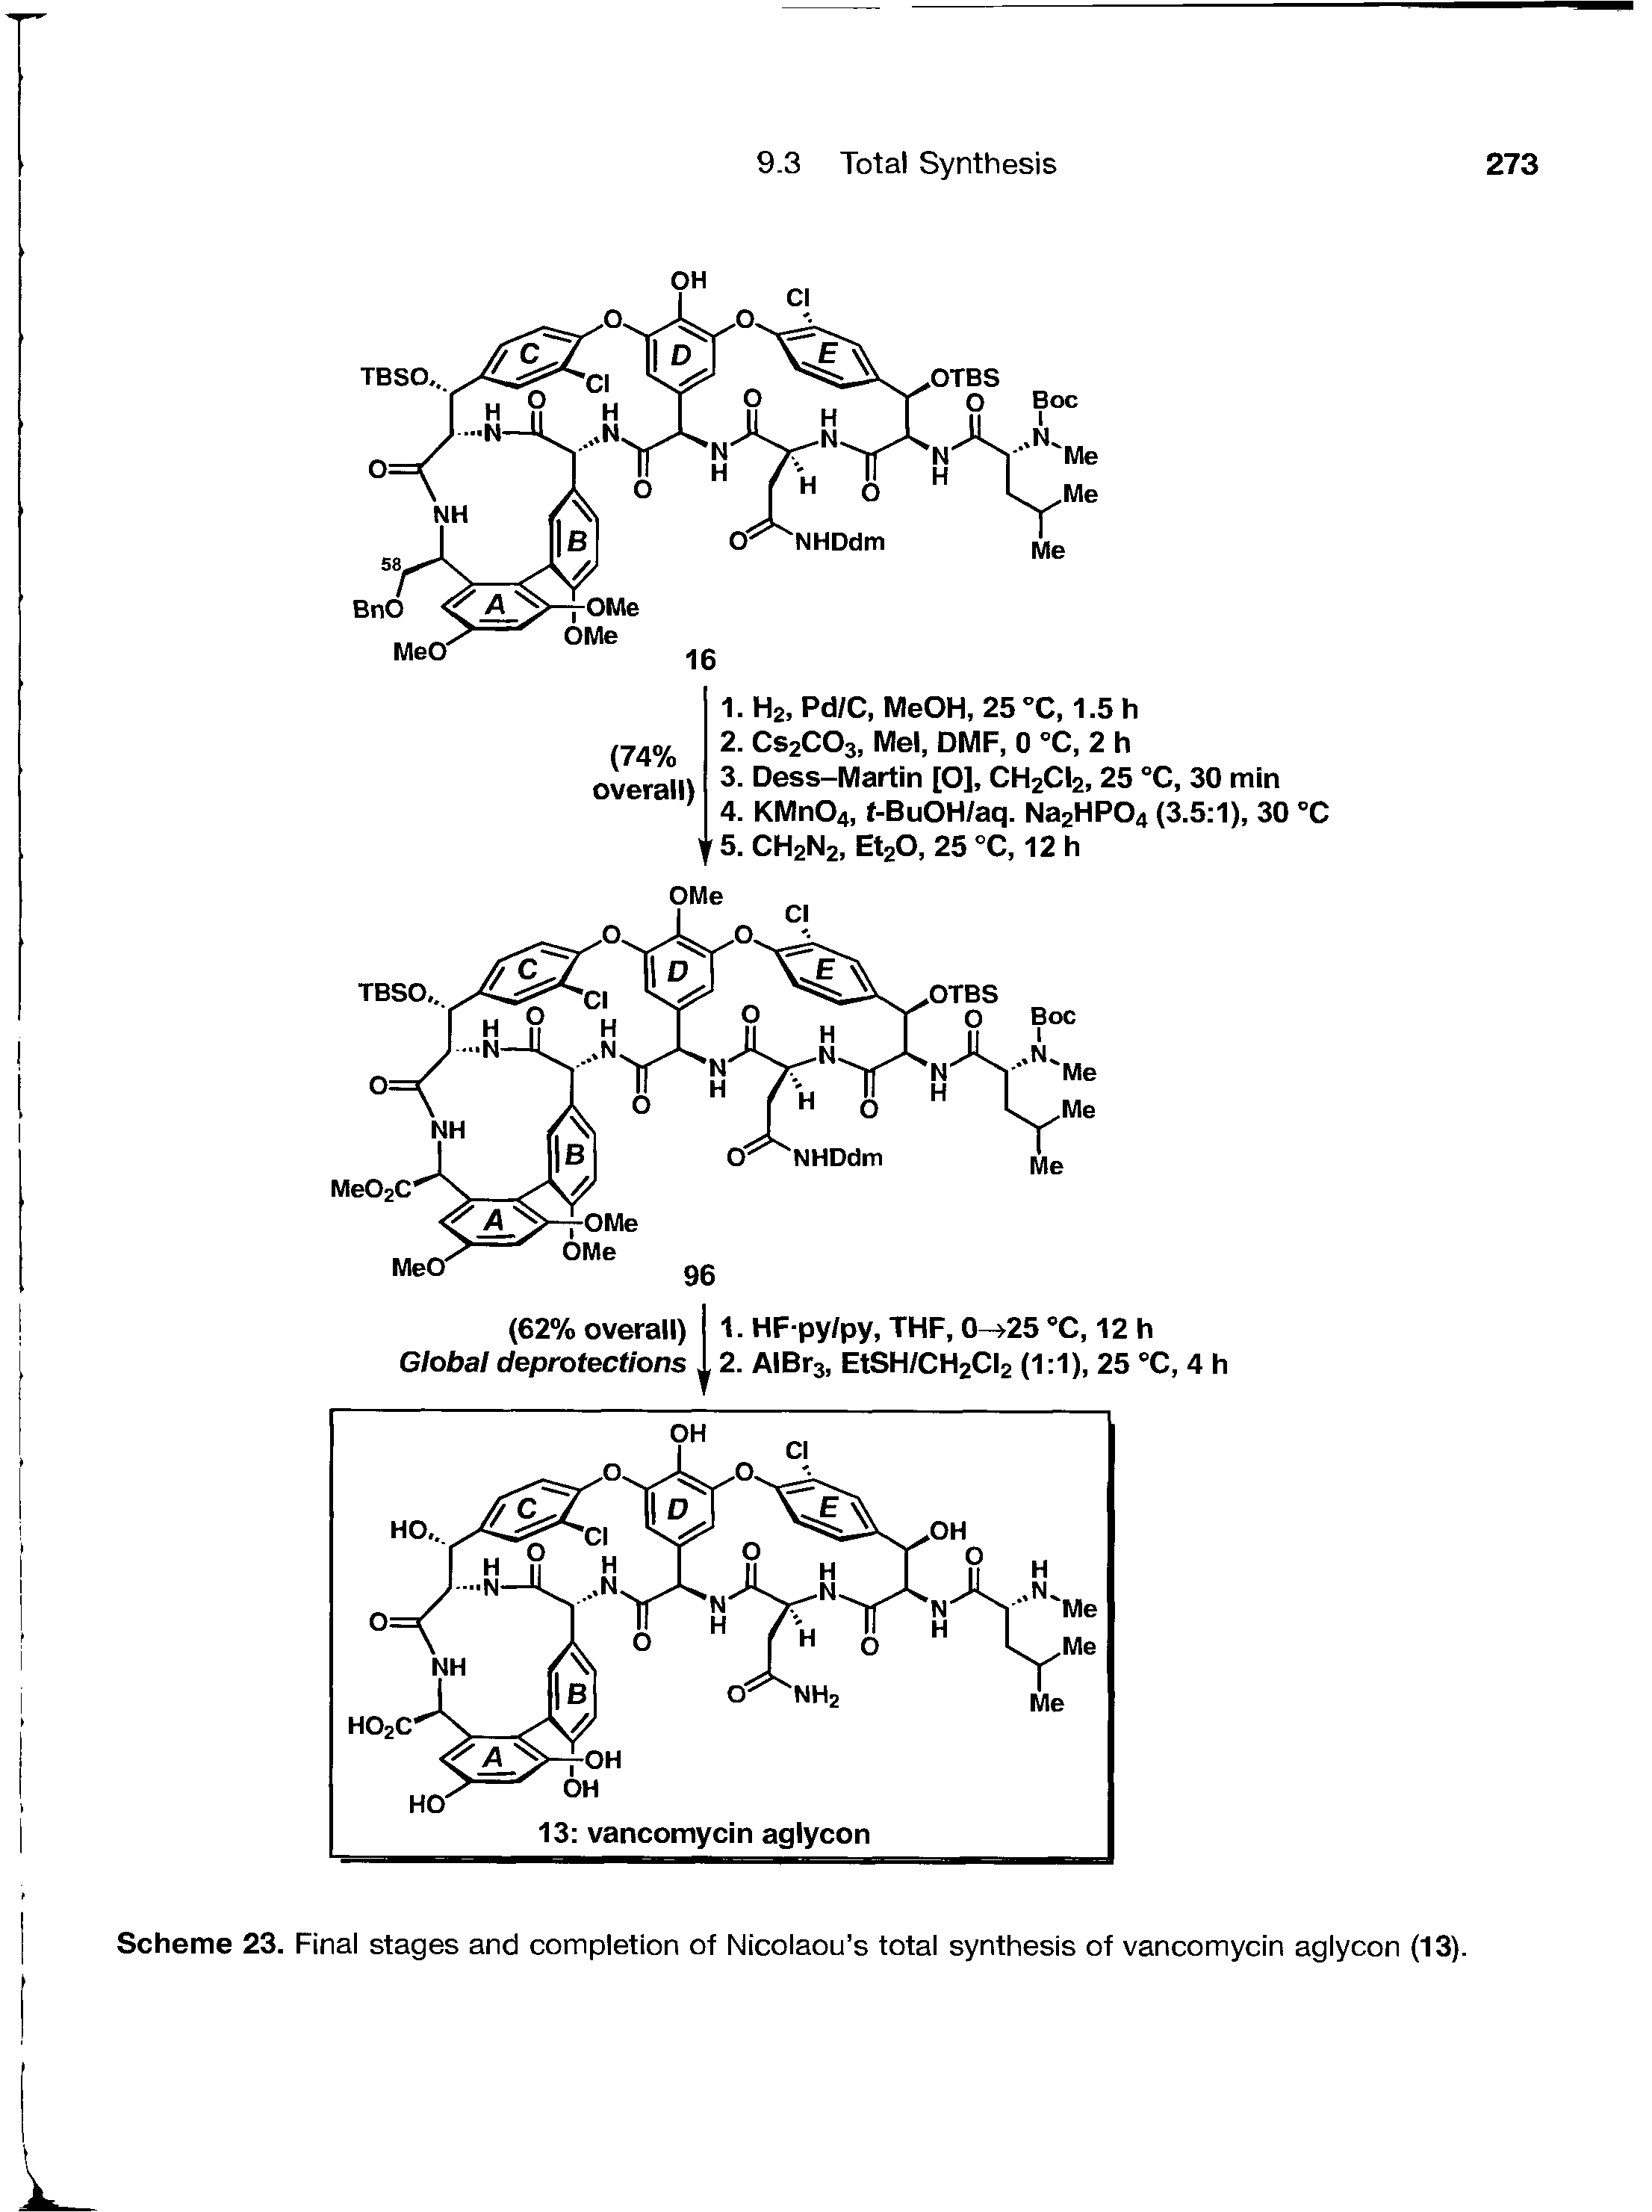 Scheme 23. Final stages and completion of Nicolaou s total synthesis of vancomycin aglycon (13).